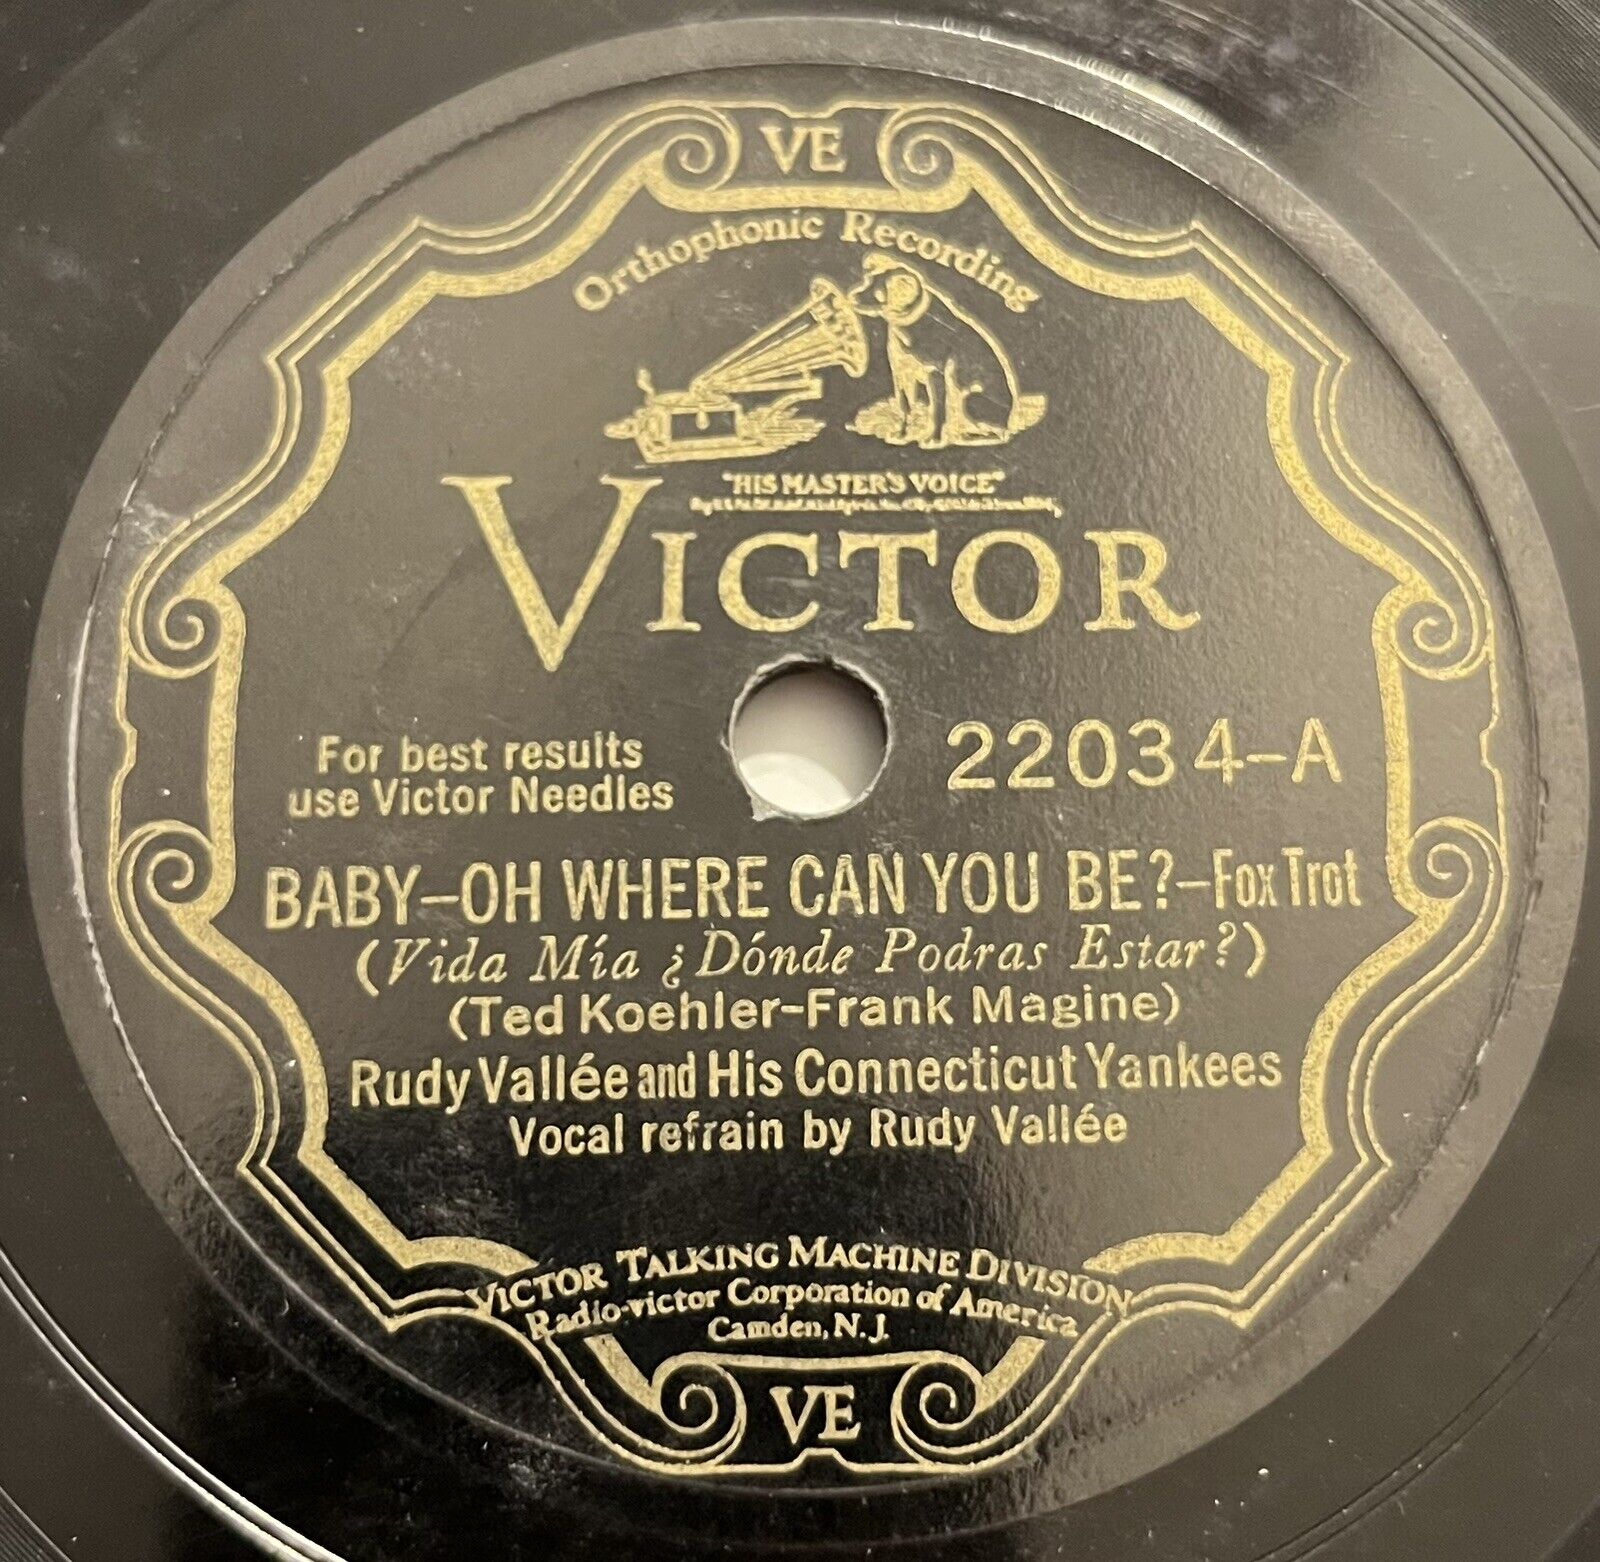 Rudy Vallee & Connecticut Yankees - VICTOR 22034 Baby Oh Where Can You Be V+ 78